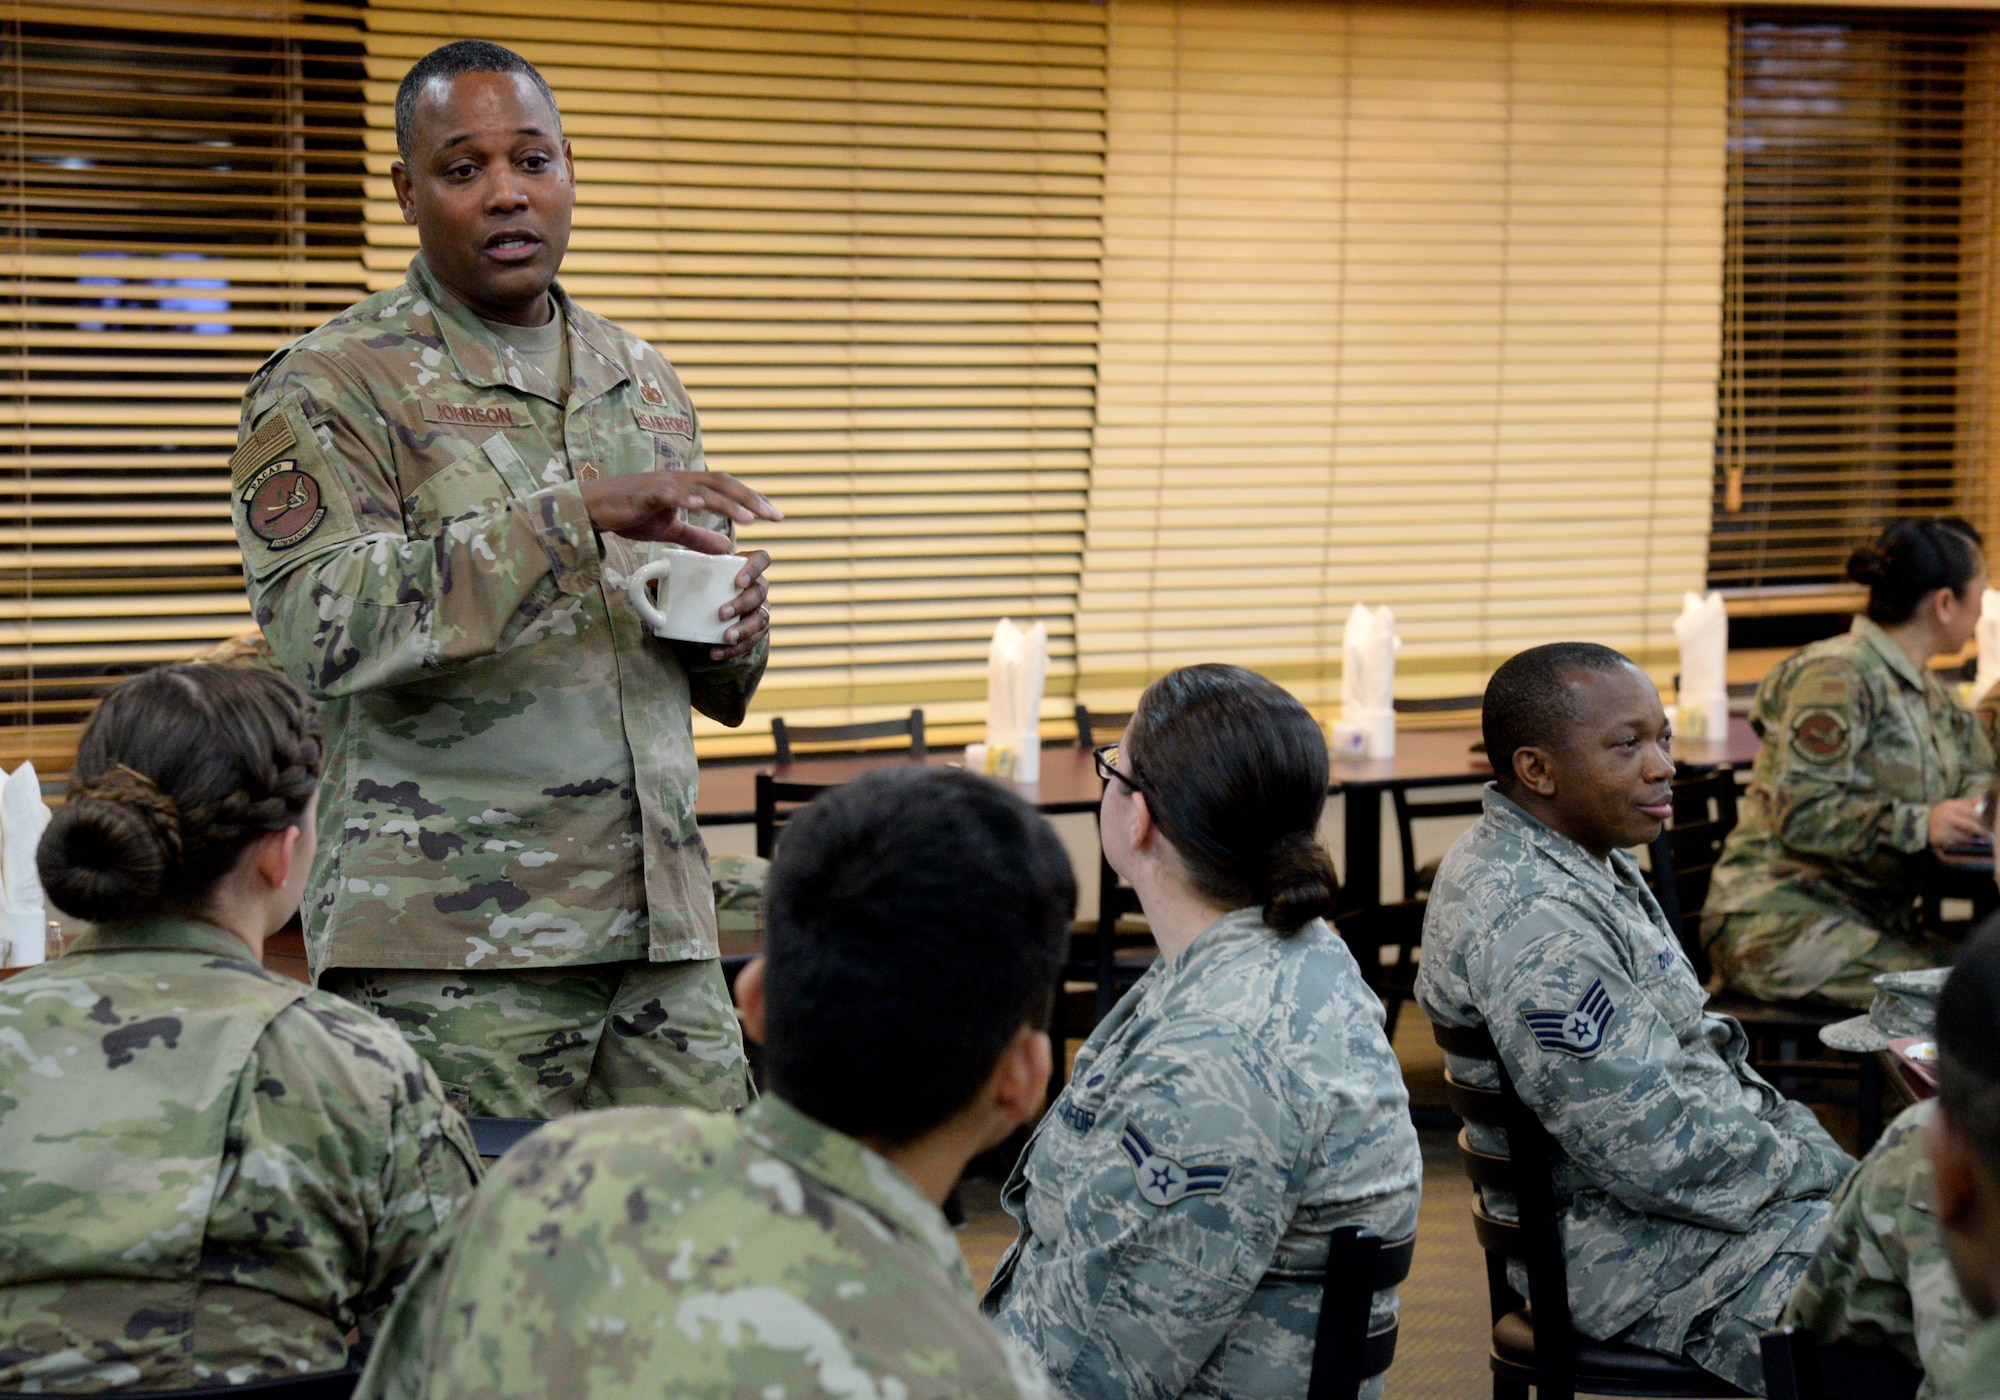 U.S. Air Force Chief Master Sgt. Anthony Johnson, Pacific Air Forces command chief, talks to Team Osan Airmen during a visit, Oct. 17, 2019, at Osan Air Base, Republic of Korea. While gaining an in-depth exposure of the installation’s unique mission, Johnson alongside Gen. CQ Brown, Jr., PACAF commander, used the visit as an opportunity to explain PACAF’s priorities and how vital Team Osan is in contributing to the Indo-Pacific region’s security and stability. (U.S. Air Force photo by Tech. Sgt. Matt Davis)